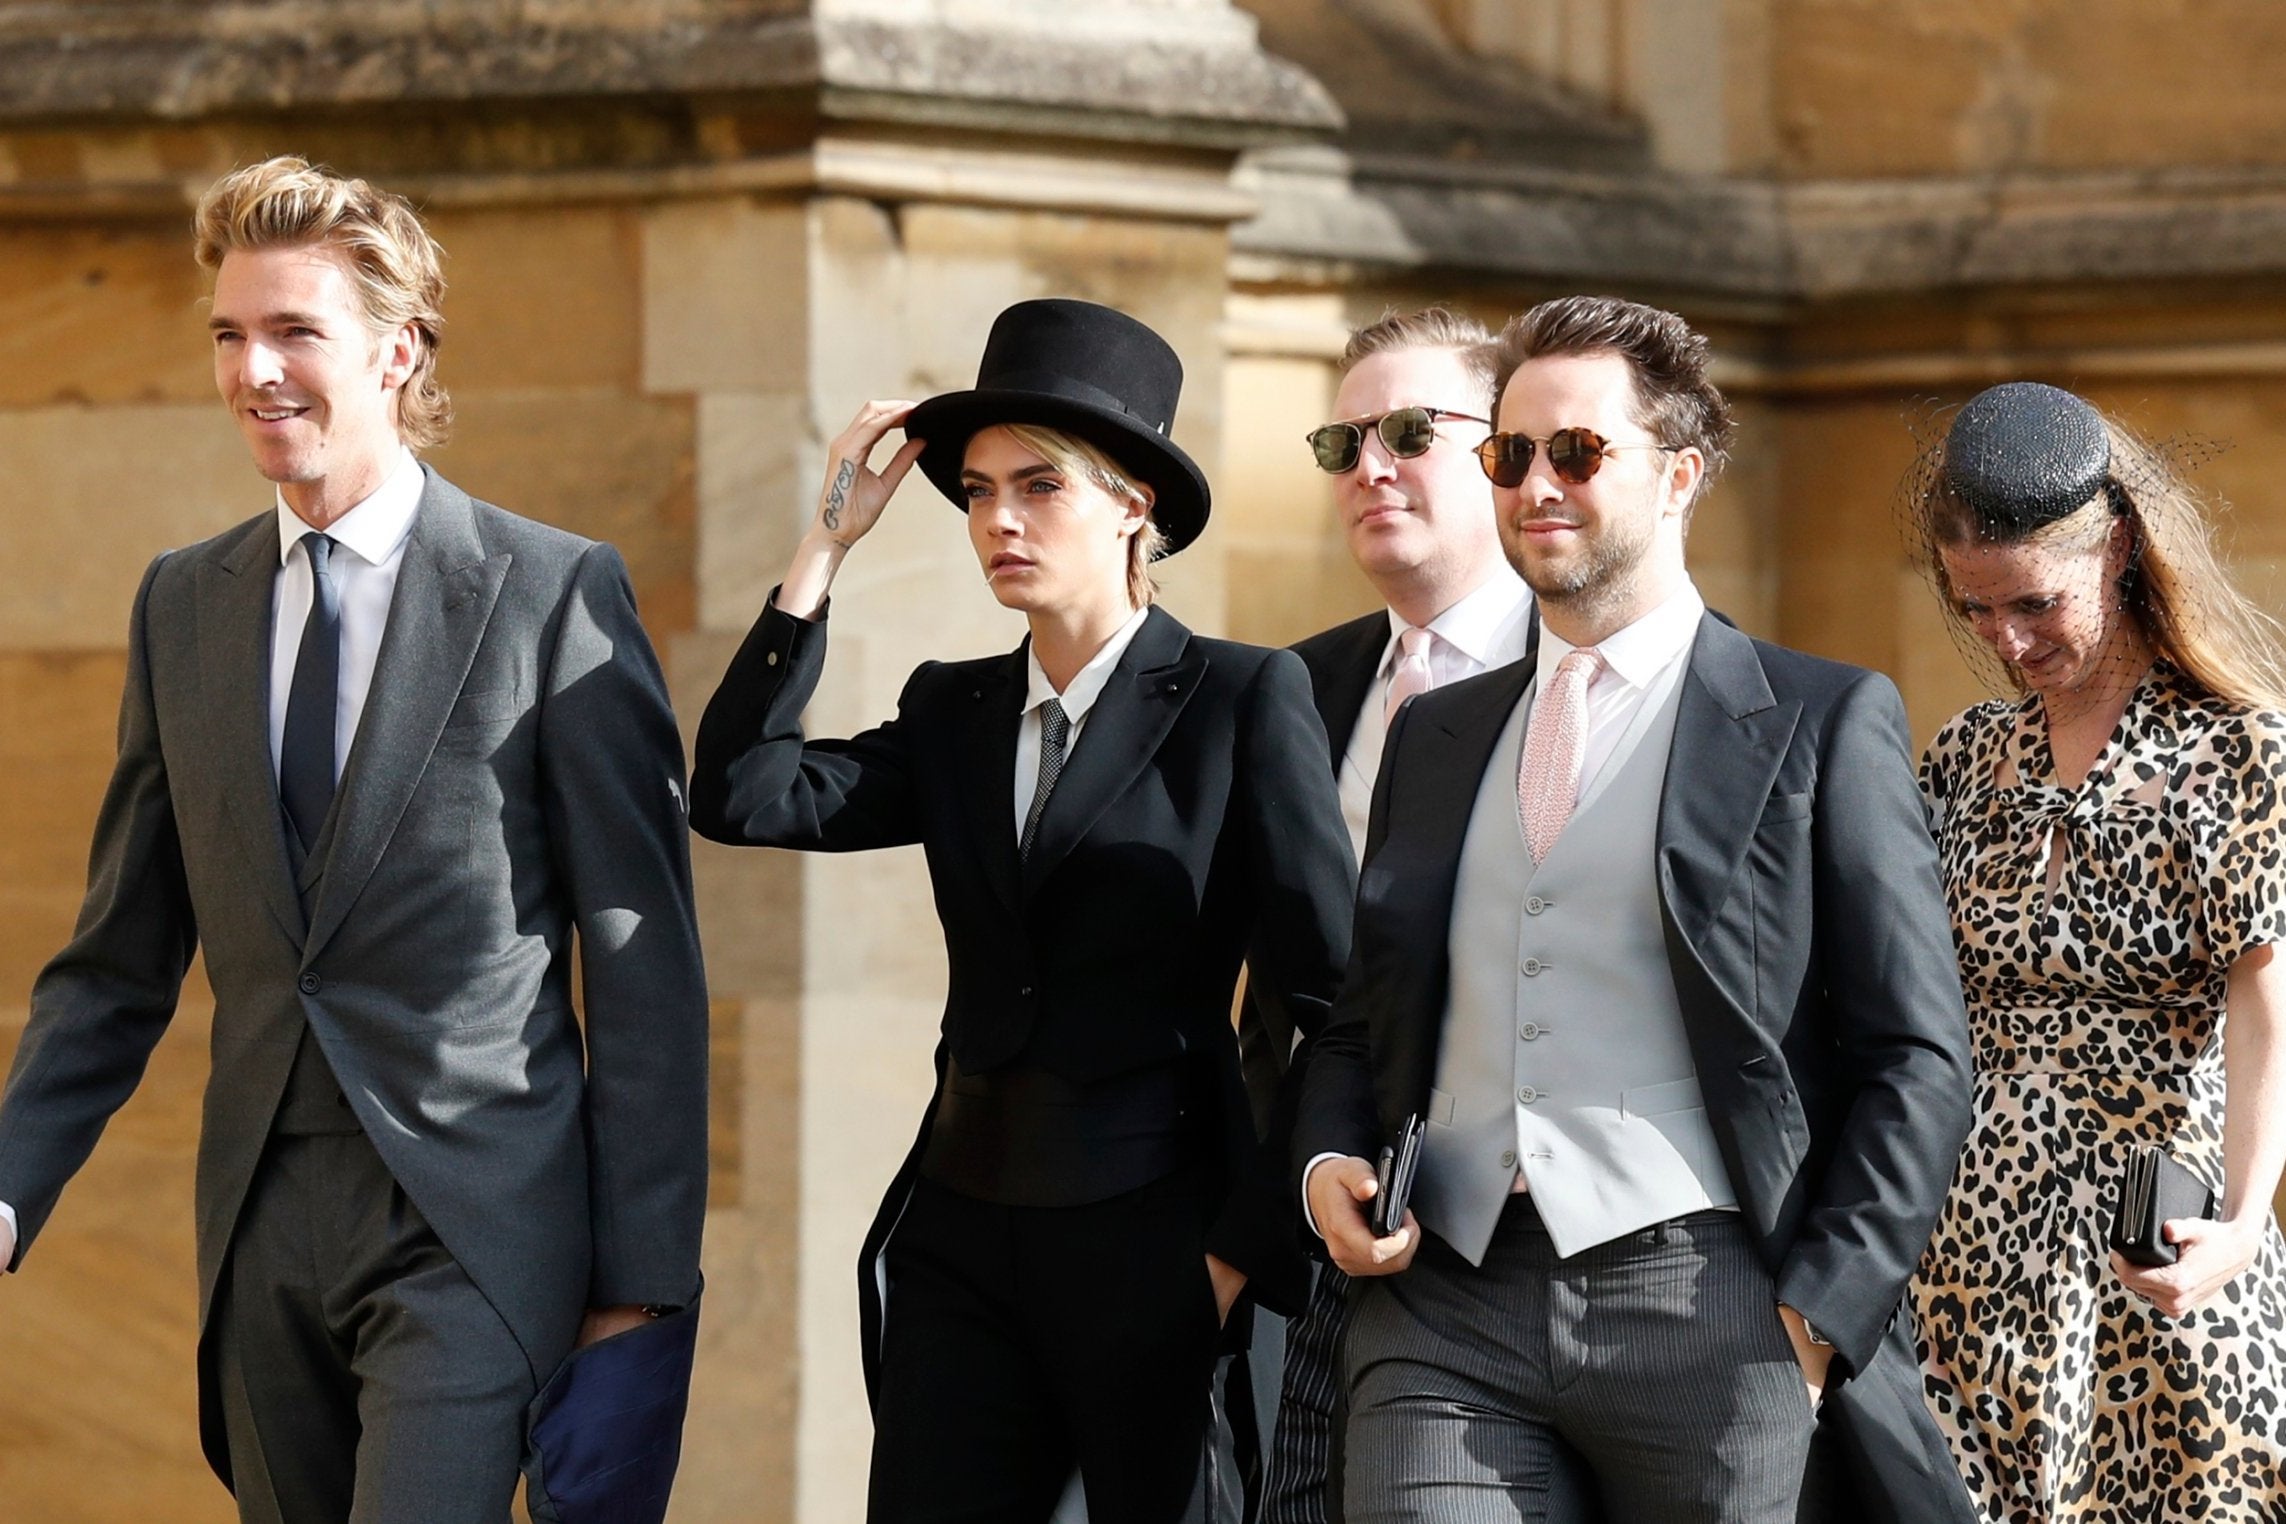 Cara Delevingne arrives to attend the wedding of Princess Eugenie of York and Jack Brooksbank